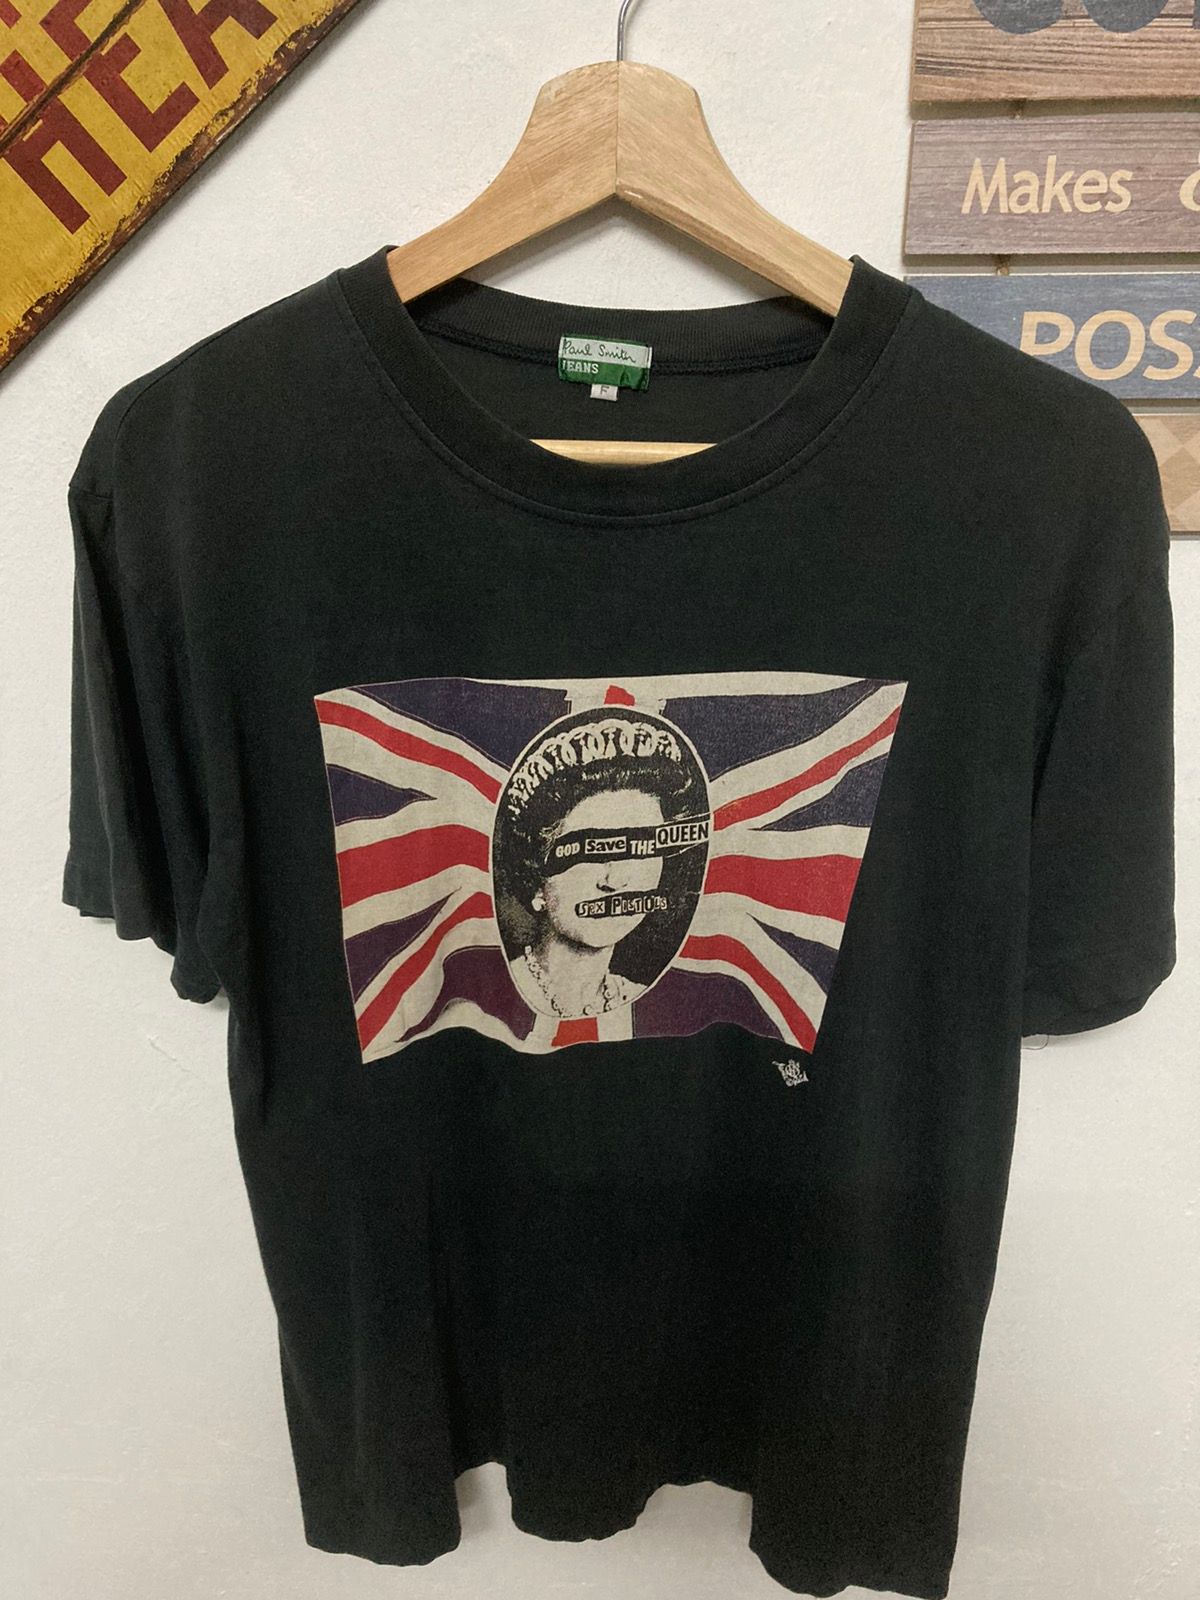 Vintage 90s Paul Smith x Sex Pistols God Save The Queen Tee - 3